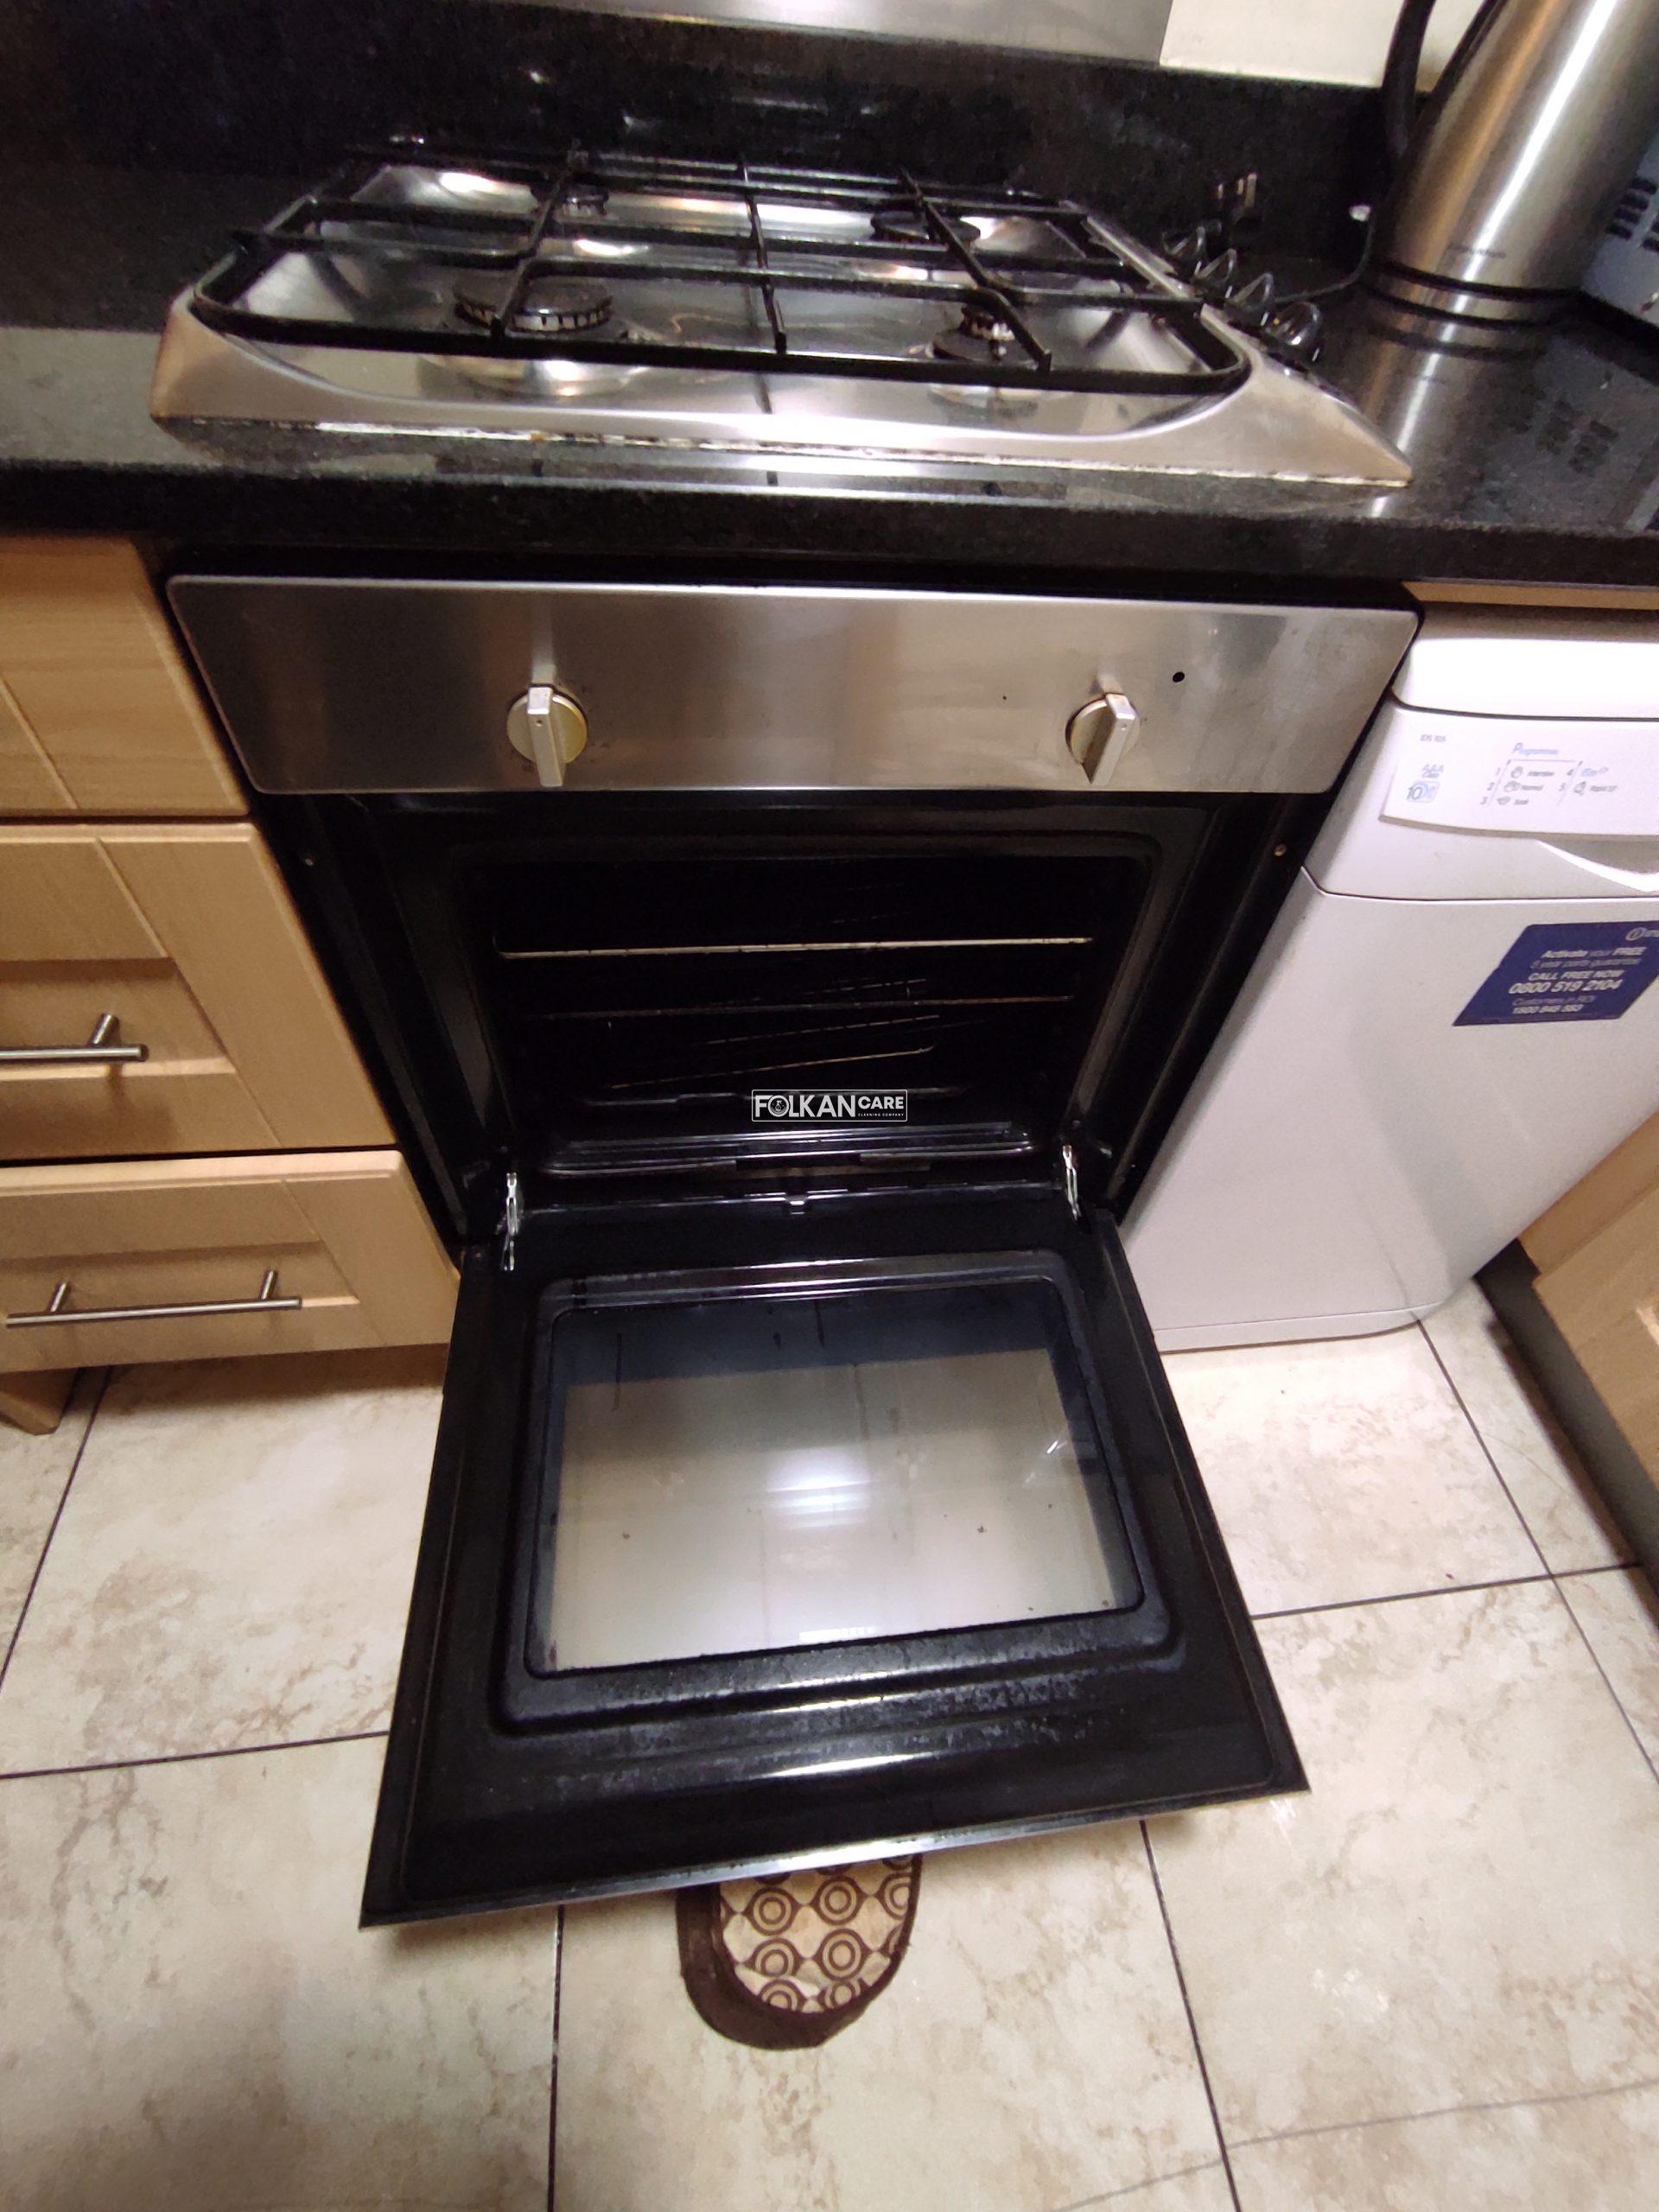 Cleaning Expert Shares: How To Clean The Oven Quickly